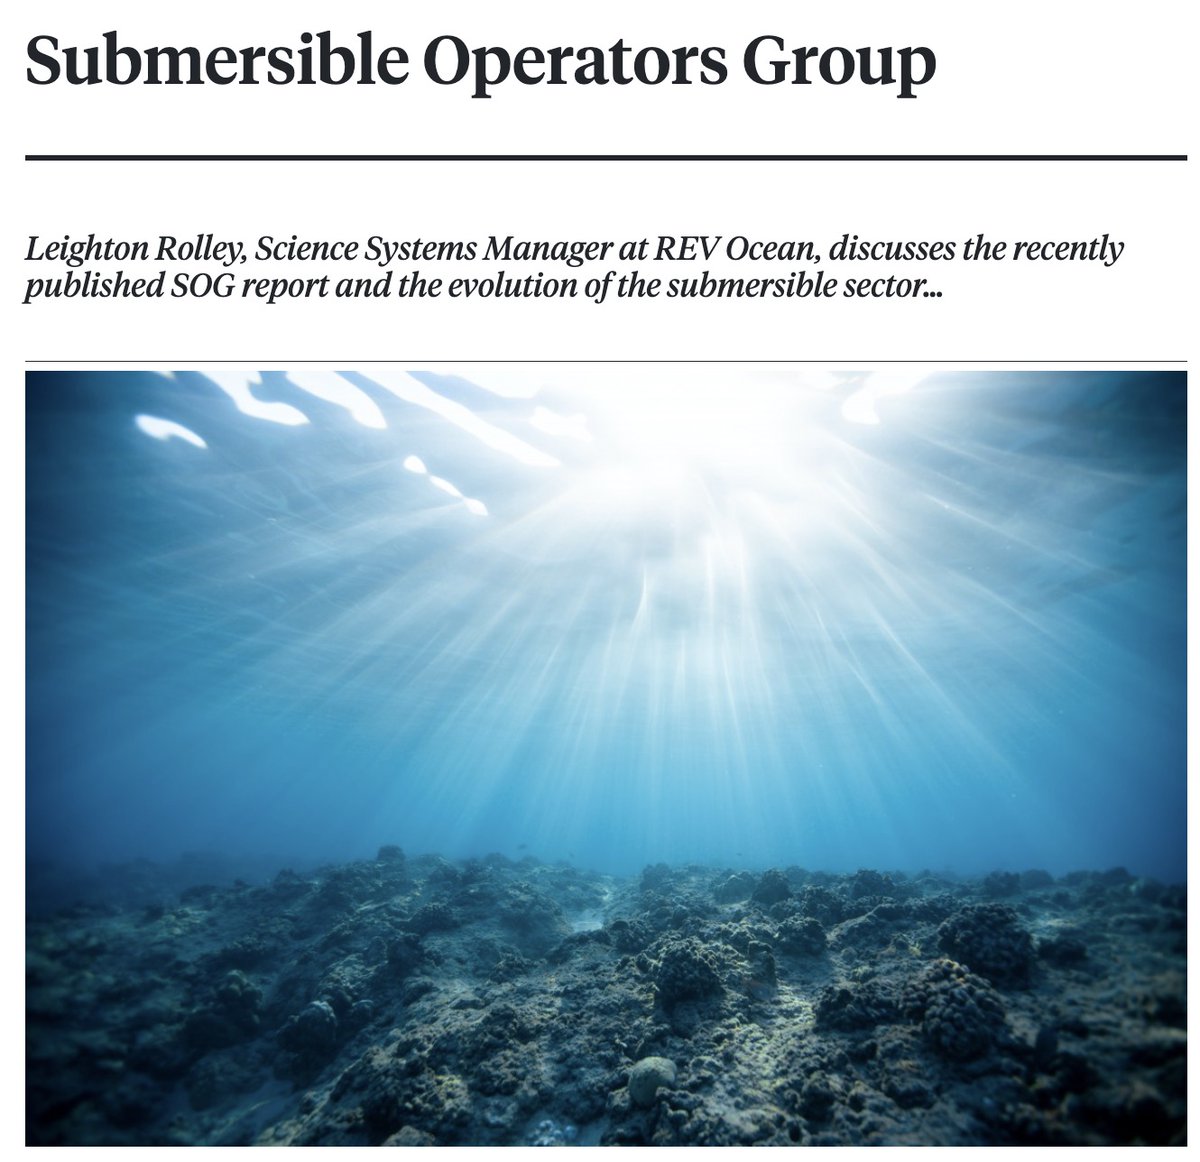 💦 Great article featuring Leighton Rolley, discussing the recently formed submersible operators group (SOG) and the importance of safety and standards in this sector. 👉 Check it out here: superyachtnews.com/operations/sub…